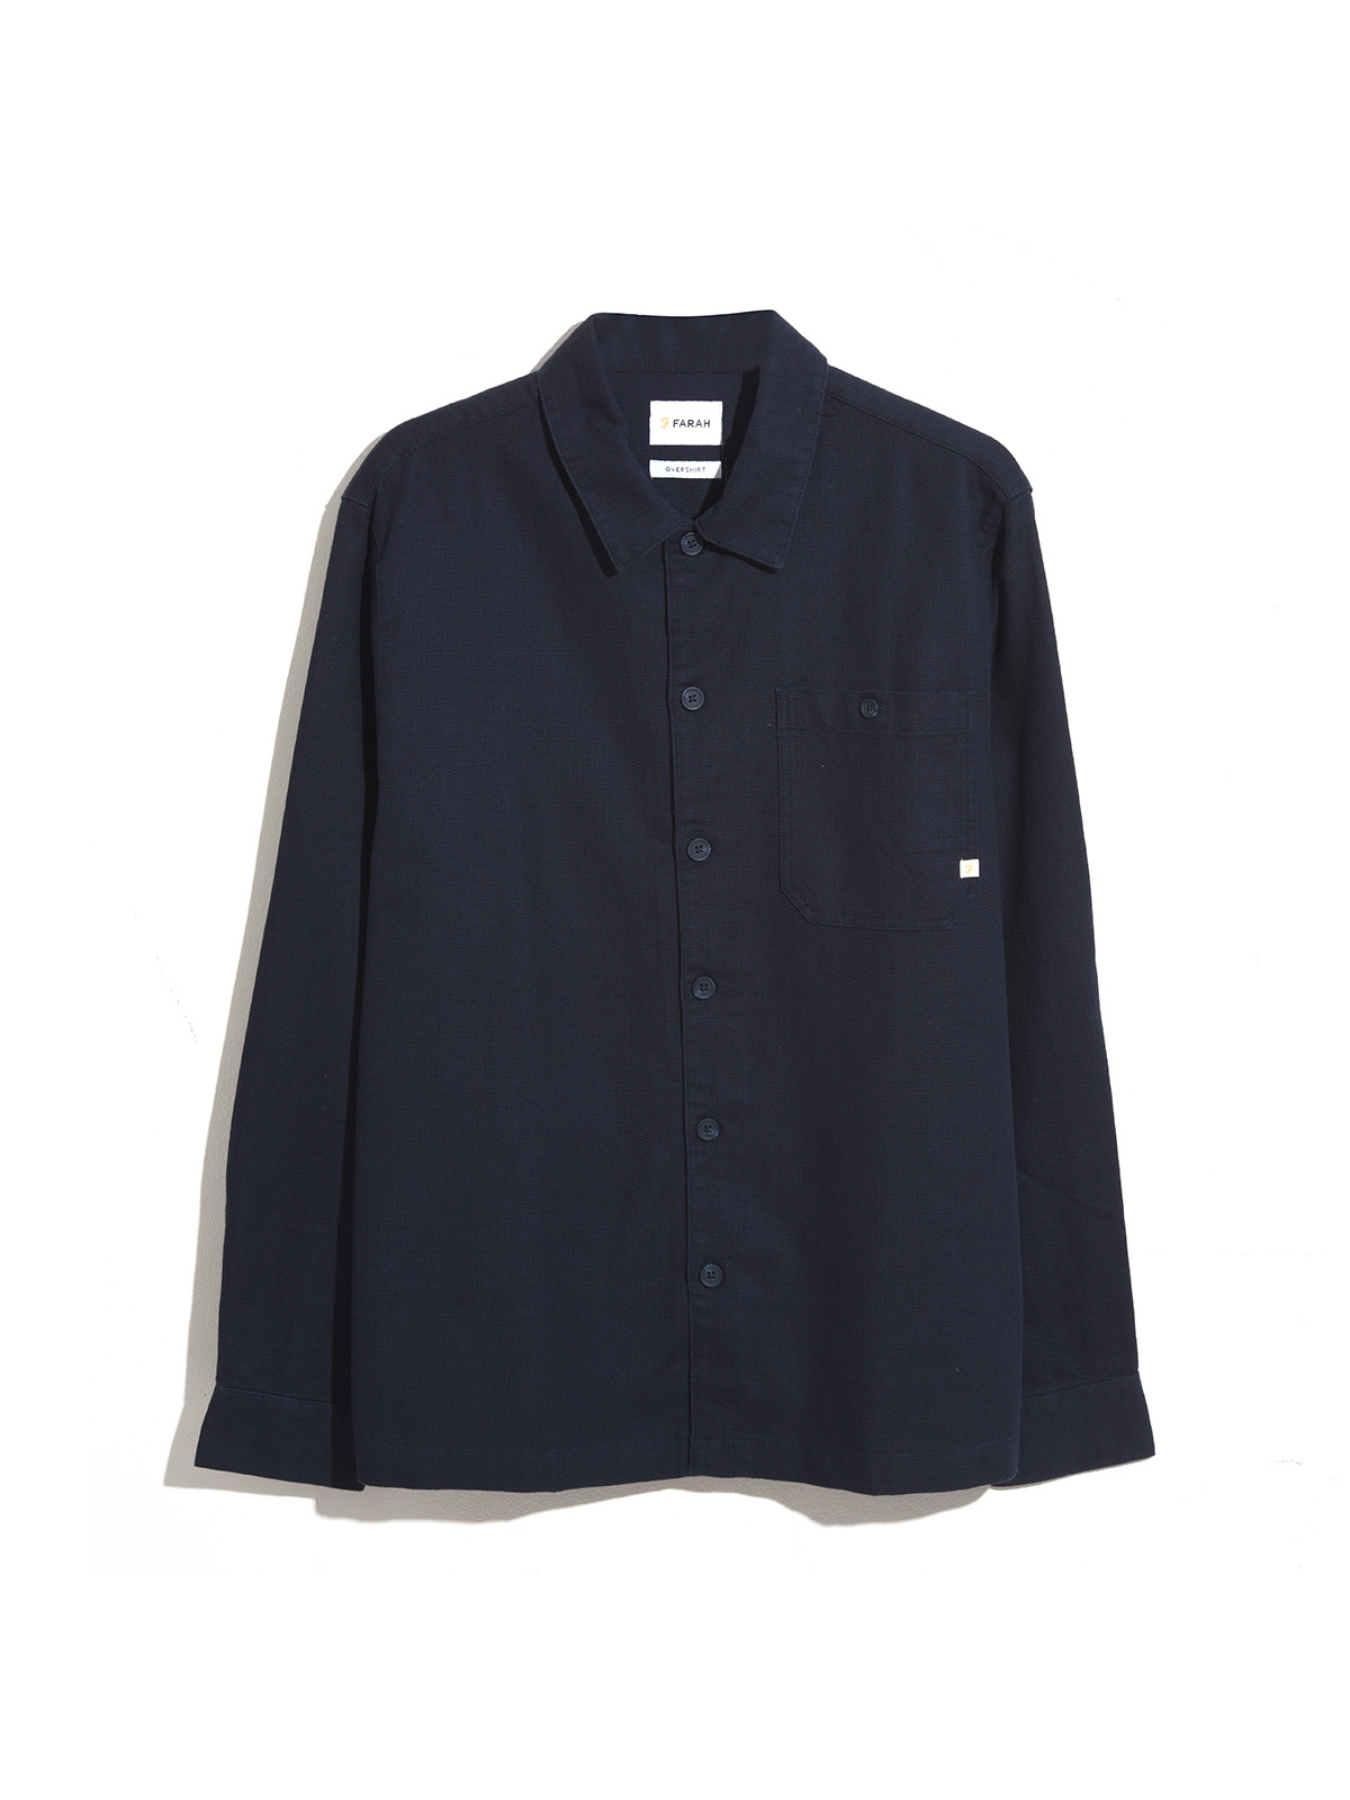 View Firmin Relaxed Fit Organic Cotton Long Sleeve Shirt In True Navy information